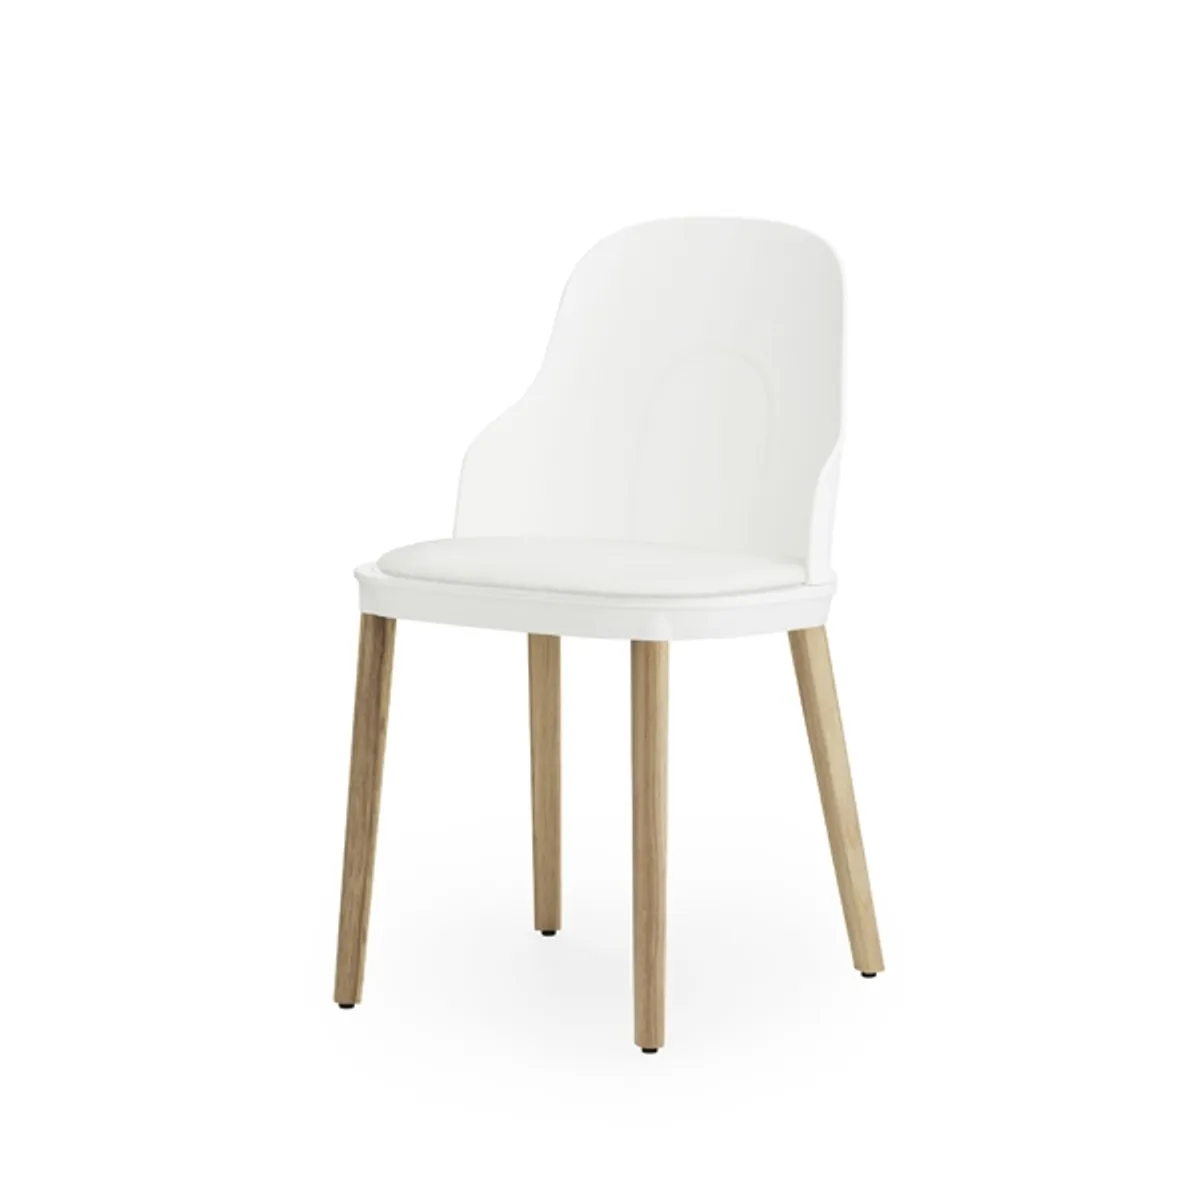 Bon soft wood chair Inside Out Contracts5